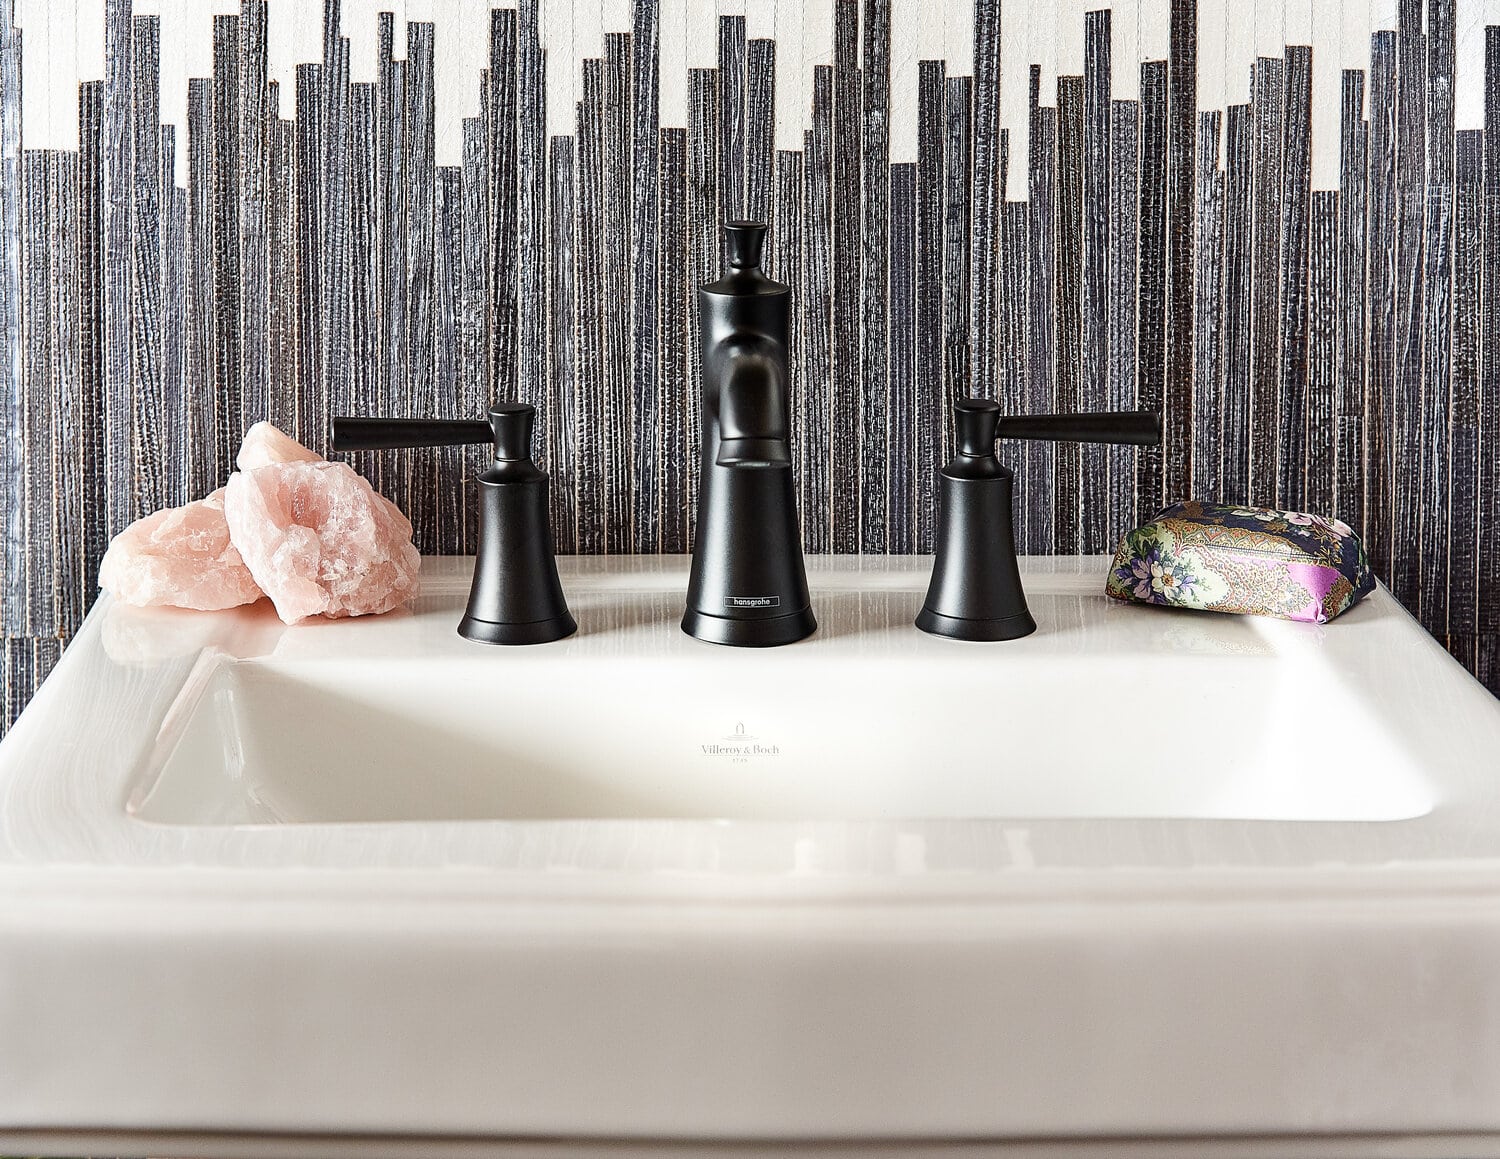 Modern bathroom sink with black fixtures and decorative tiles.